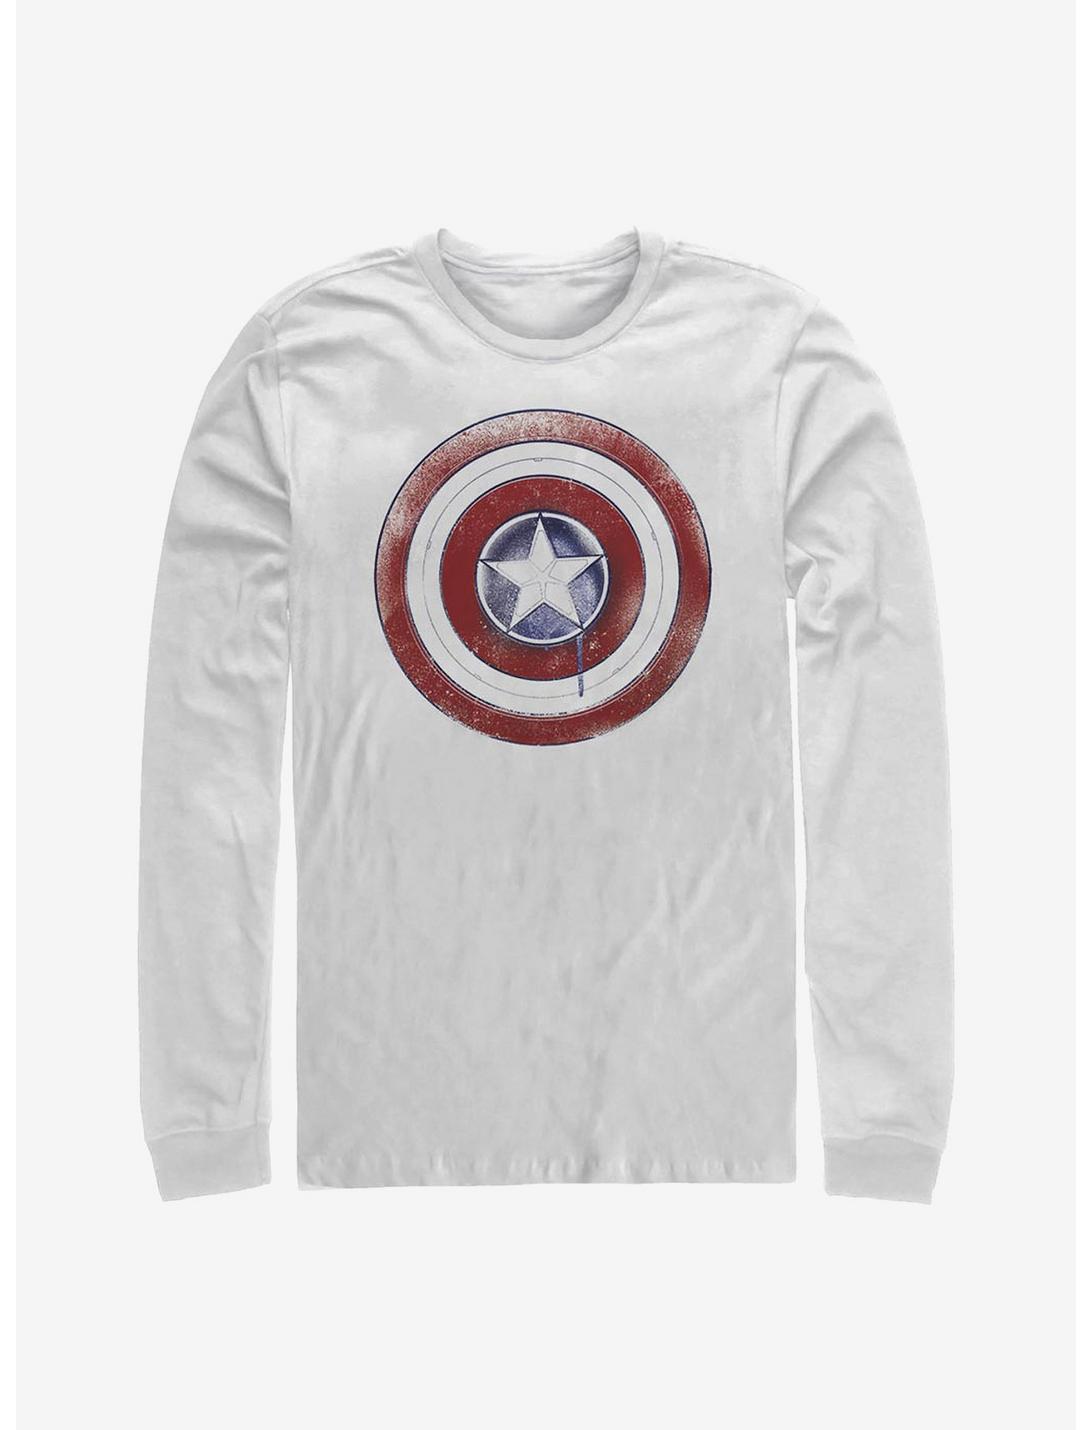 Marvel The Falcon And The Winter Soldier Paint Shield Long-Sleeve T-Shirt, WHITE, hi-res